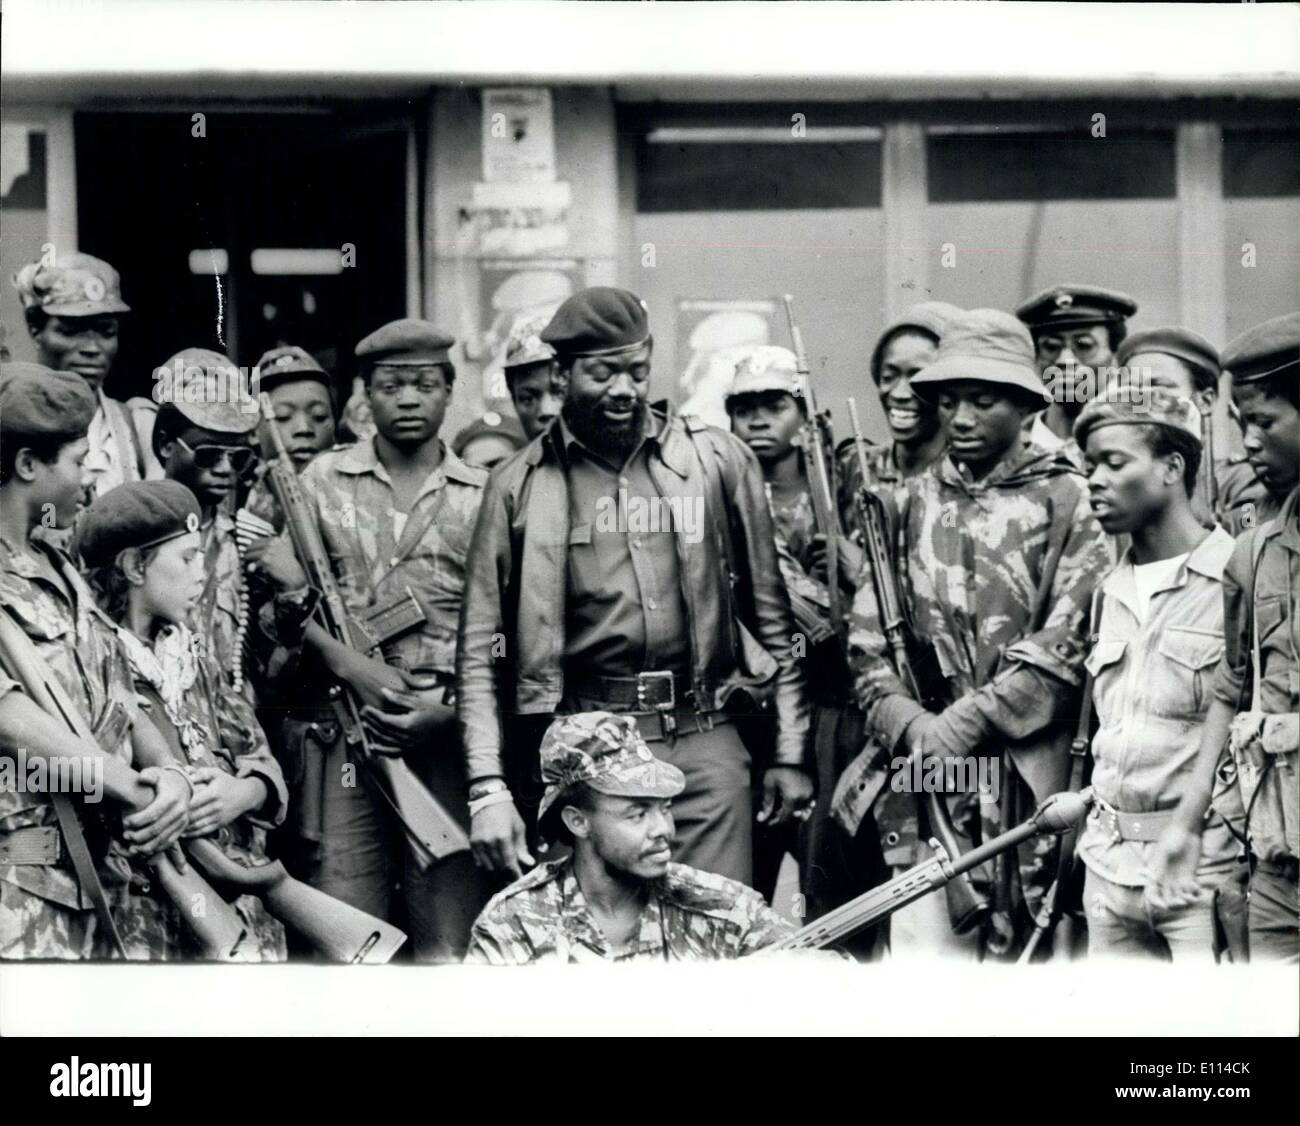 Nov. 07, 1975 - The Fighting intensifies in Angola: The struggle for control of Angola intensifies as Independence Day, November 11th approaches, despite reports from Kampala on Uganda radio of an agreement to form a Tripartite Government, In the South of the country the combined forces on UNITA and the F.N.L.A. continue to put intense military pressure on the M.P.L.A. Photo shows Dr. Jonas Savimbi pictured with his UNITA troops outside his NOVA Lisboa headquarters. Stock Photo